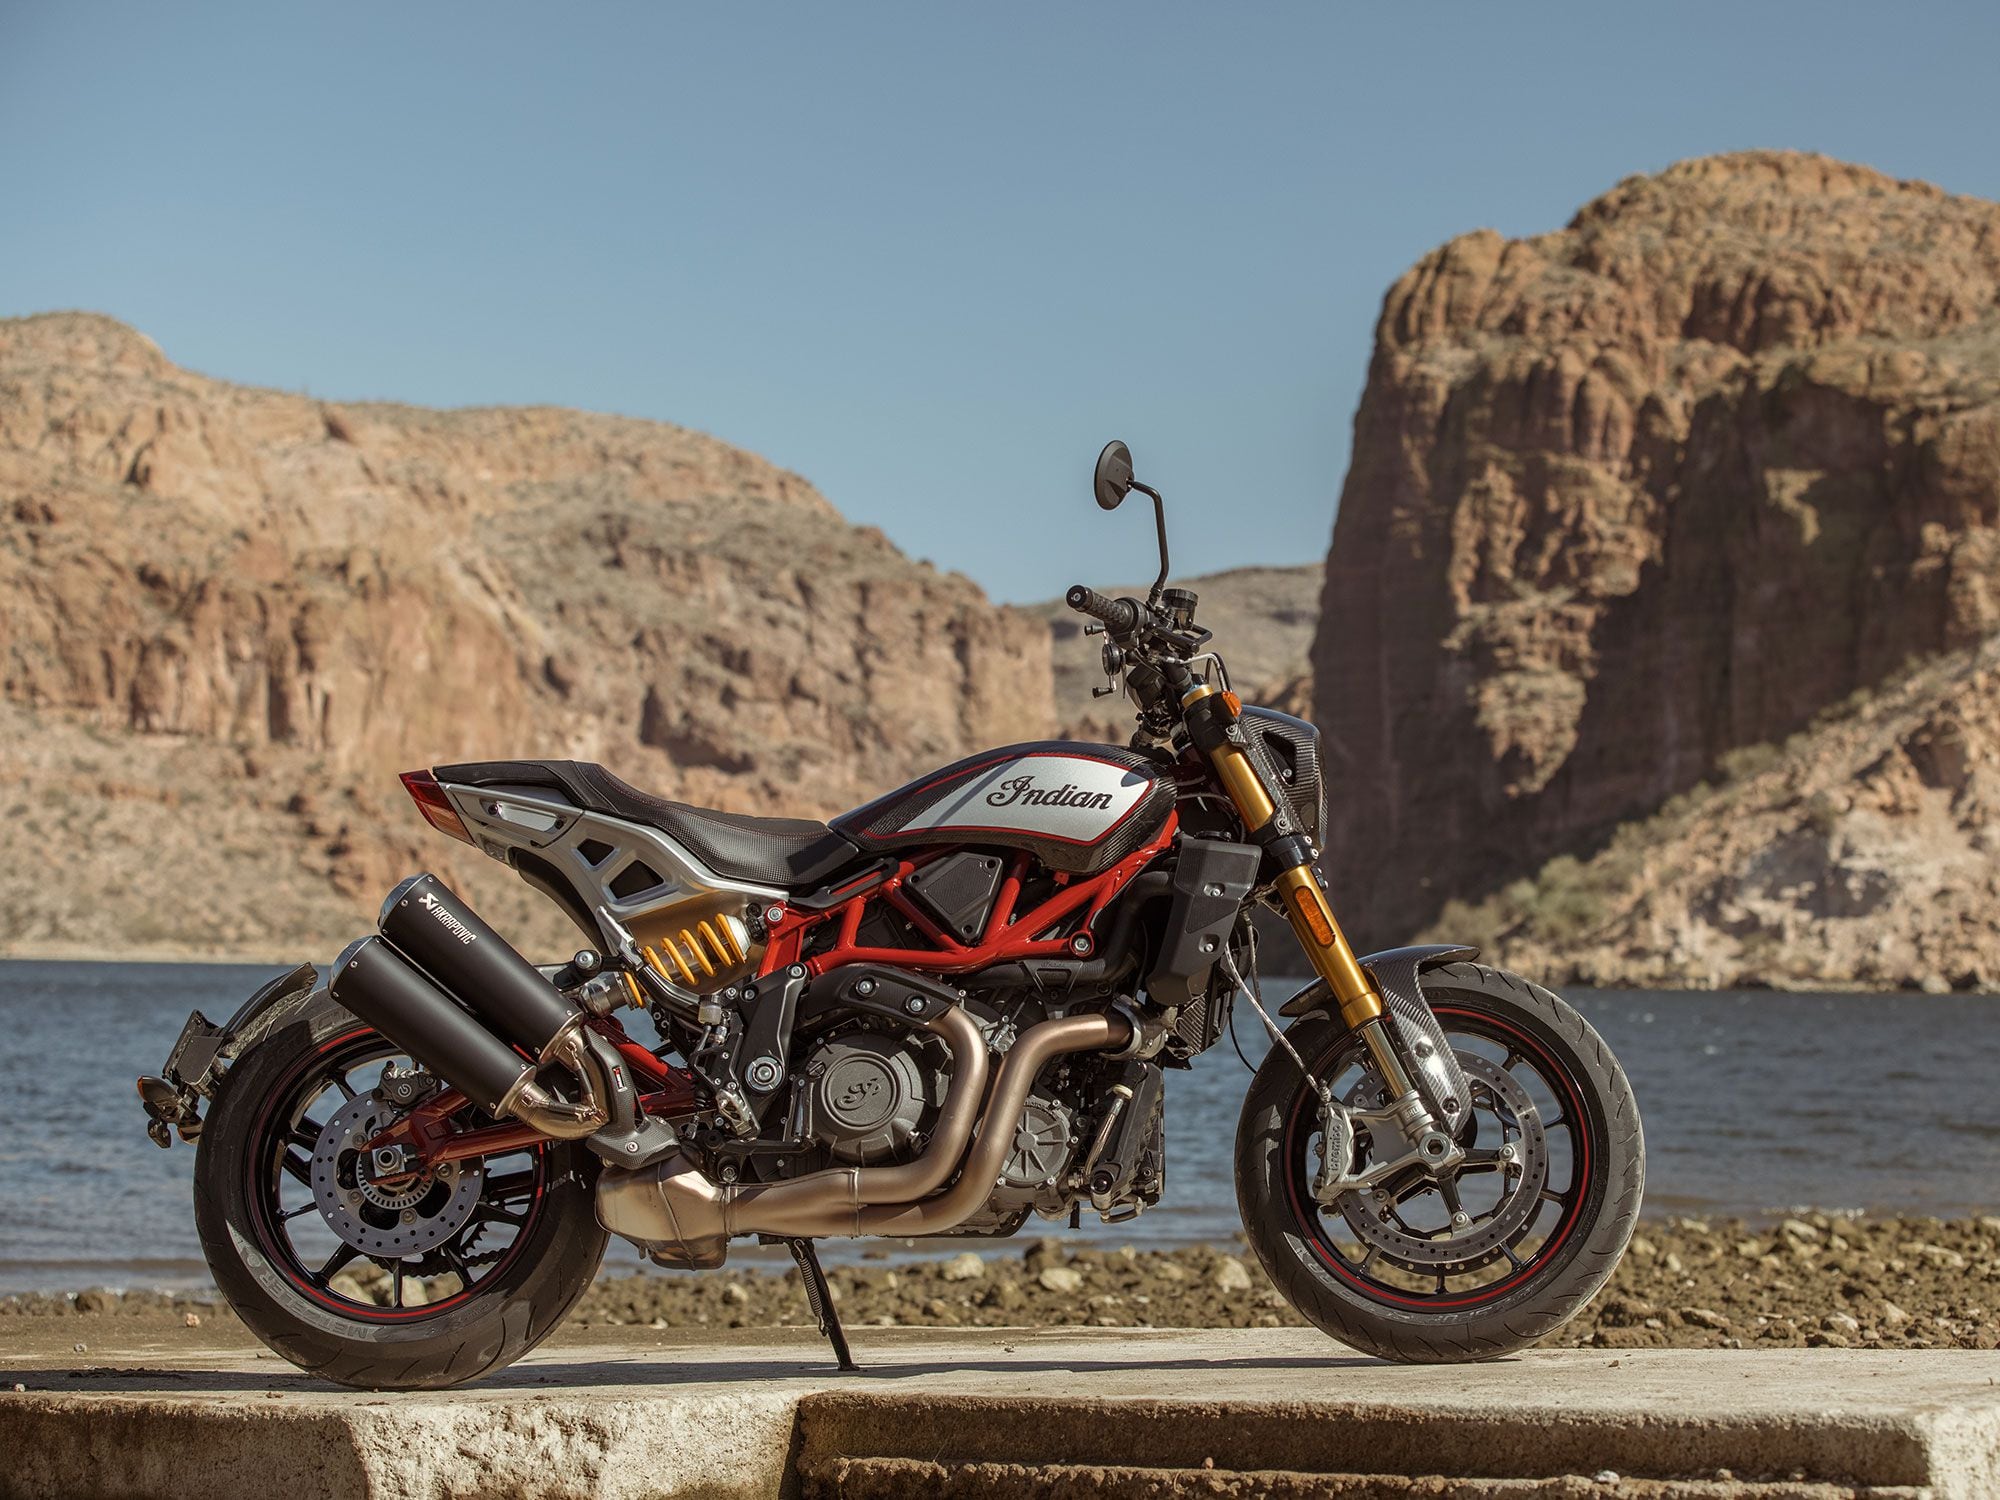 The R Carbon model is the halo of the FTR 1200 lineup, retailing for $16,999. In the sunlight, droolworthy carbon fiber paneling and Öhlins suspension catch the eye.